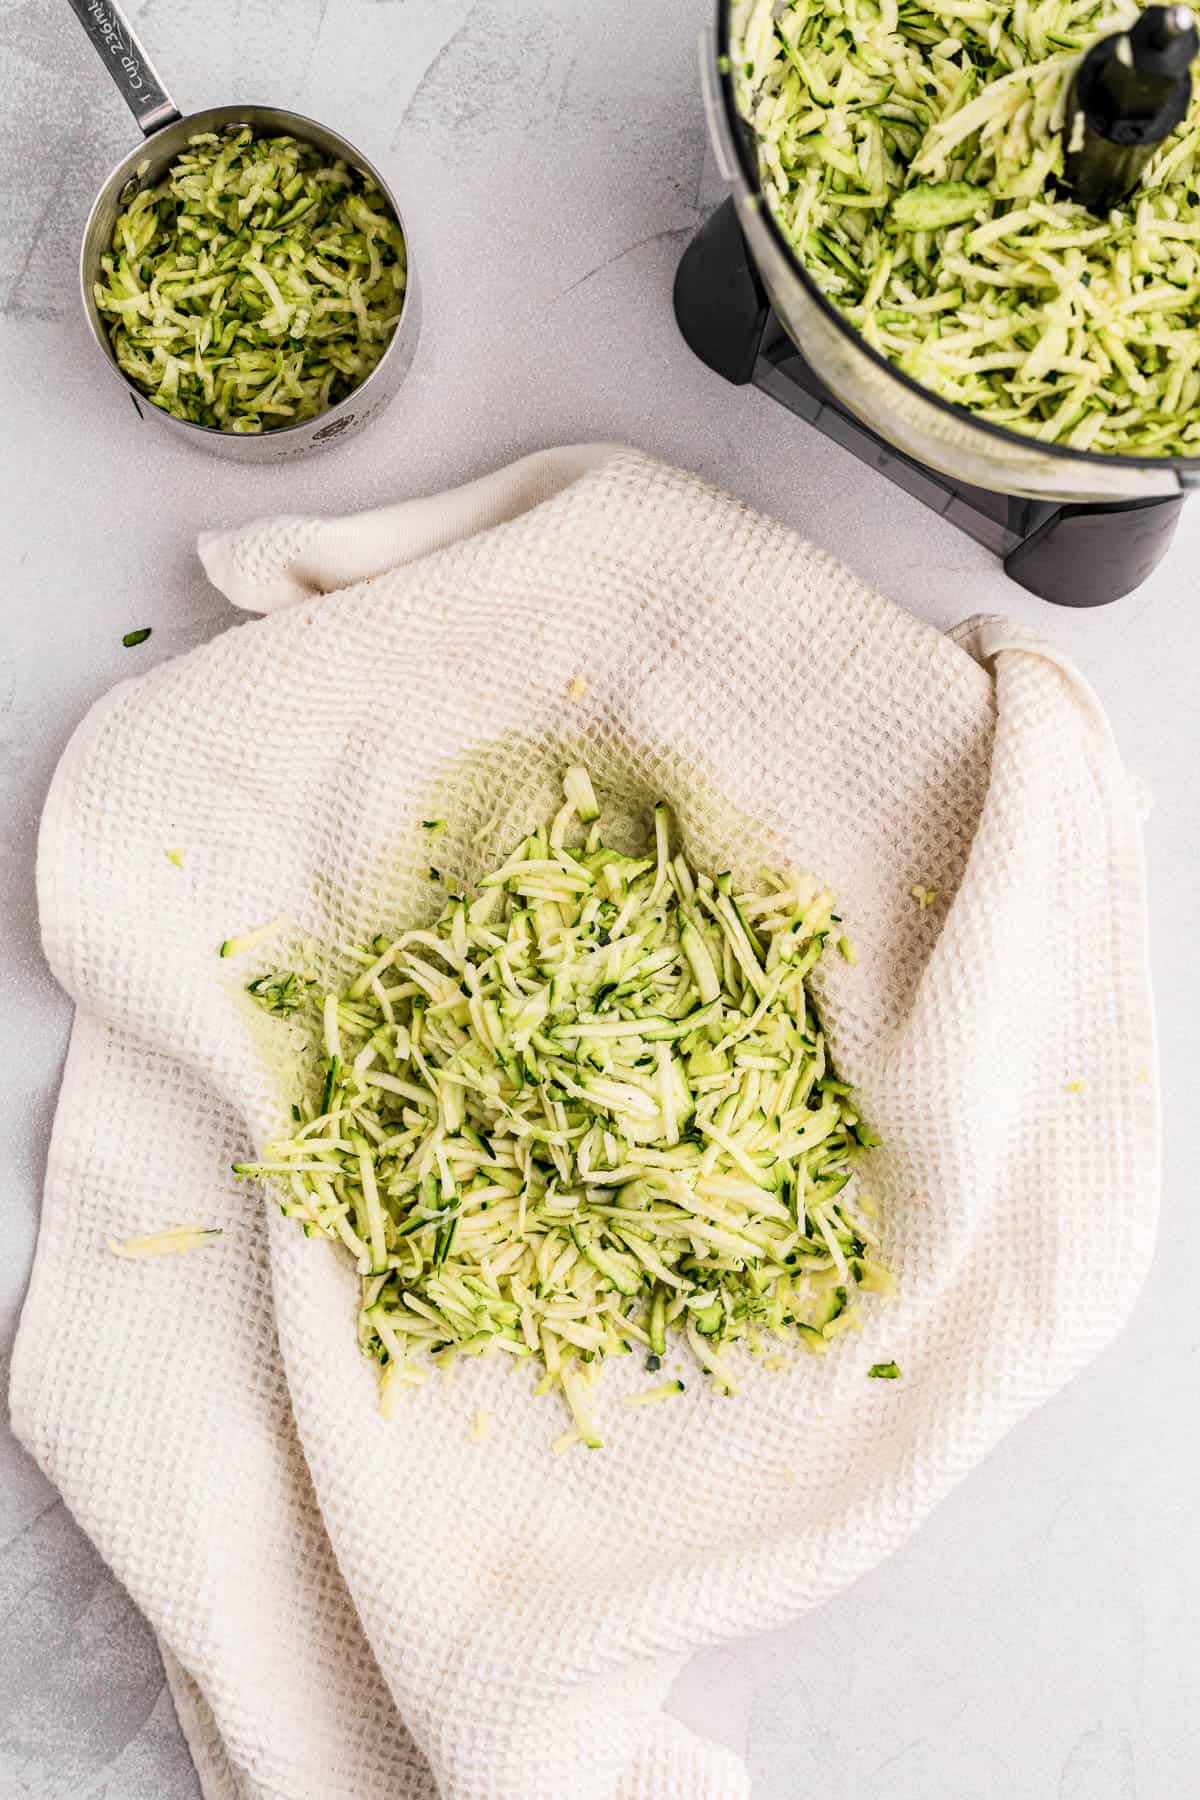 squeezing excess moisture out of grated zucchini.